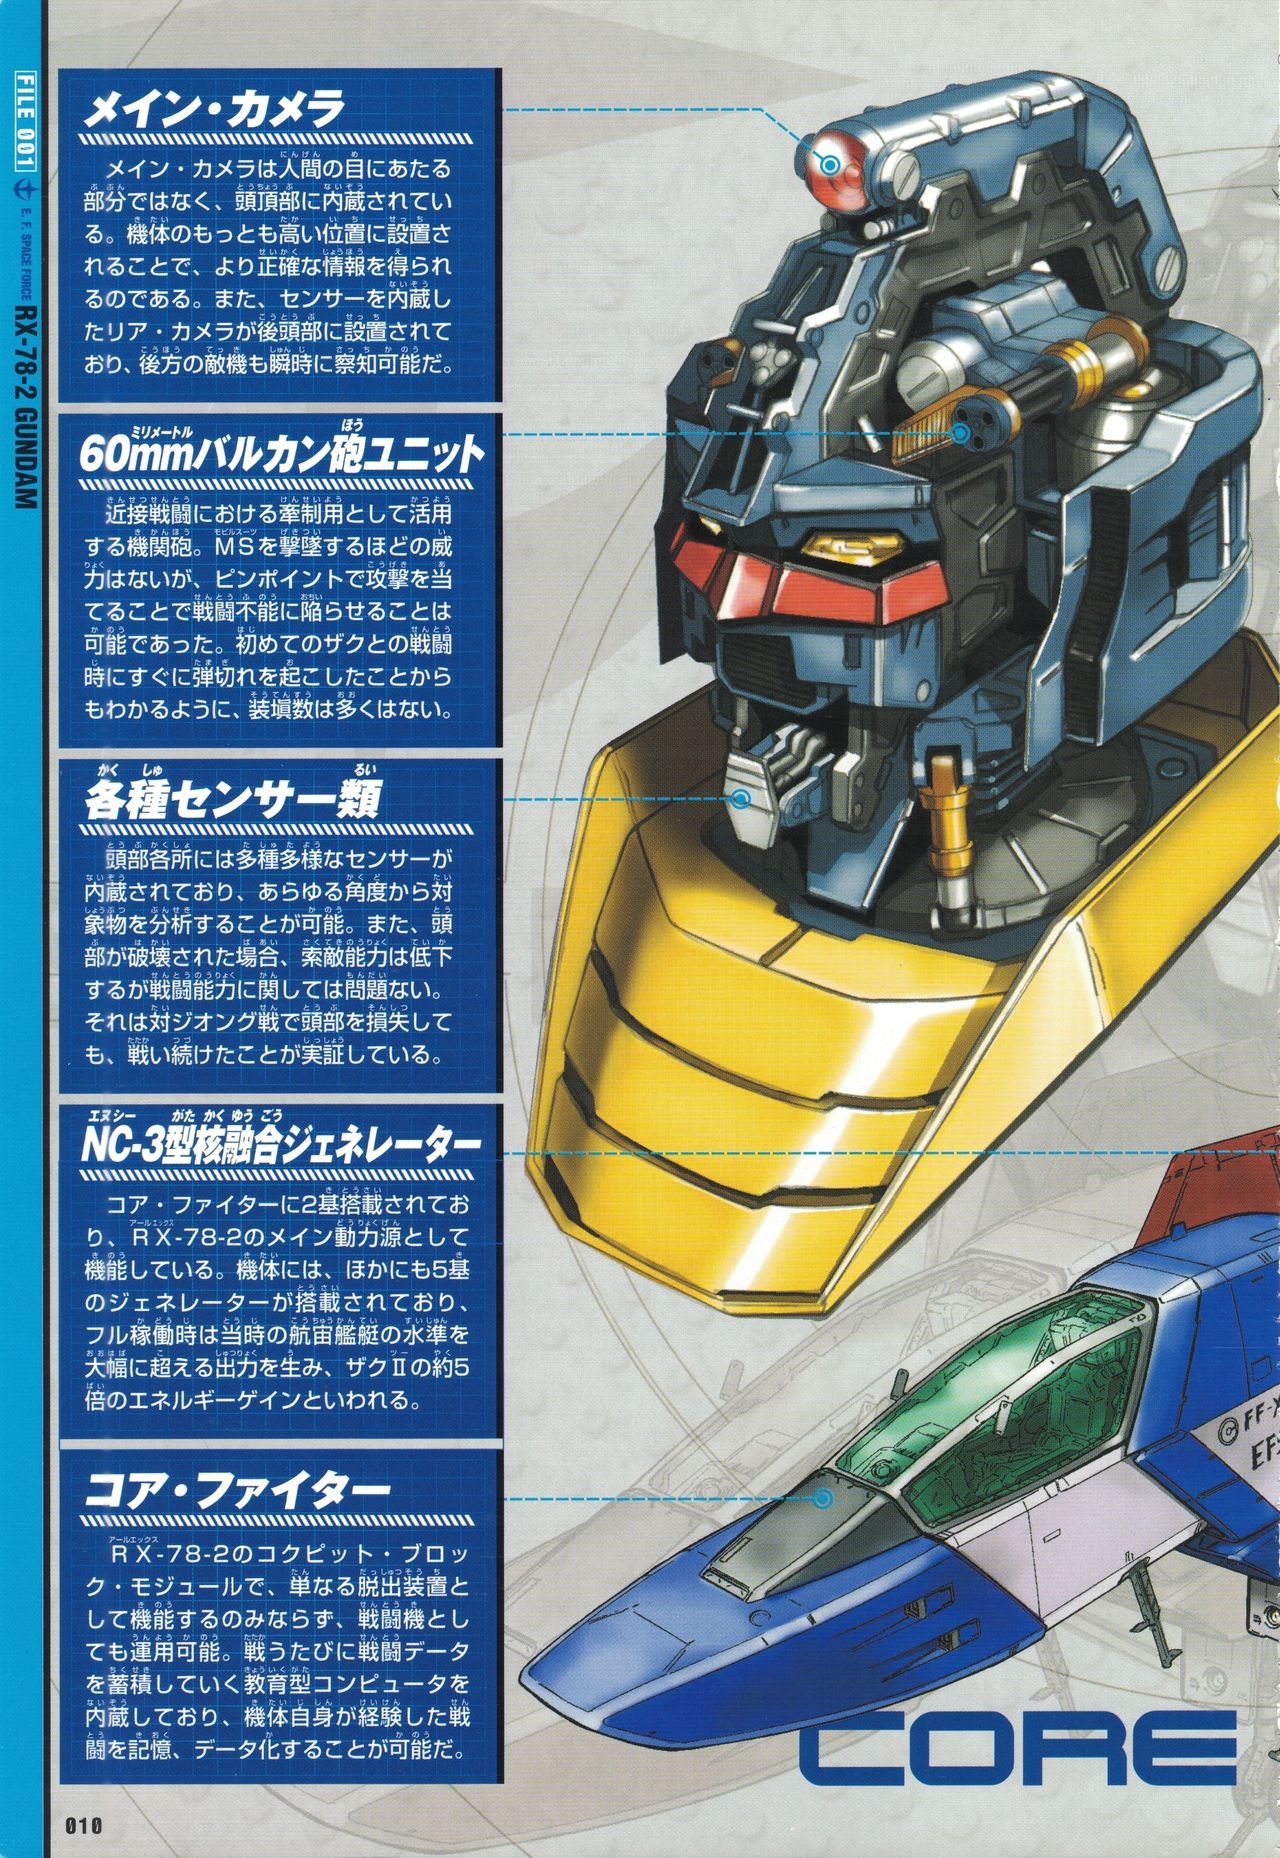 Mobile Suit Gundam - New Cross-Section Book - One Year War Edition 12